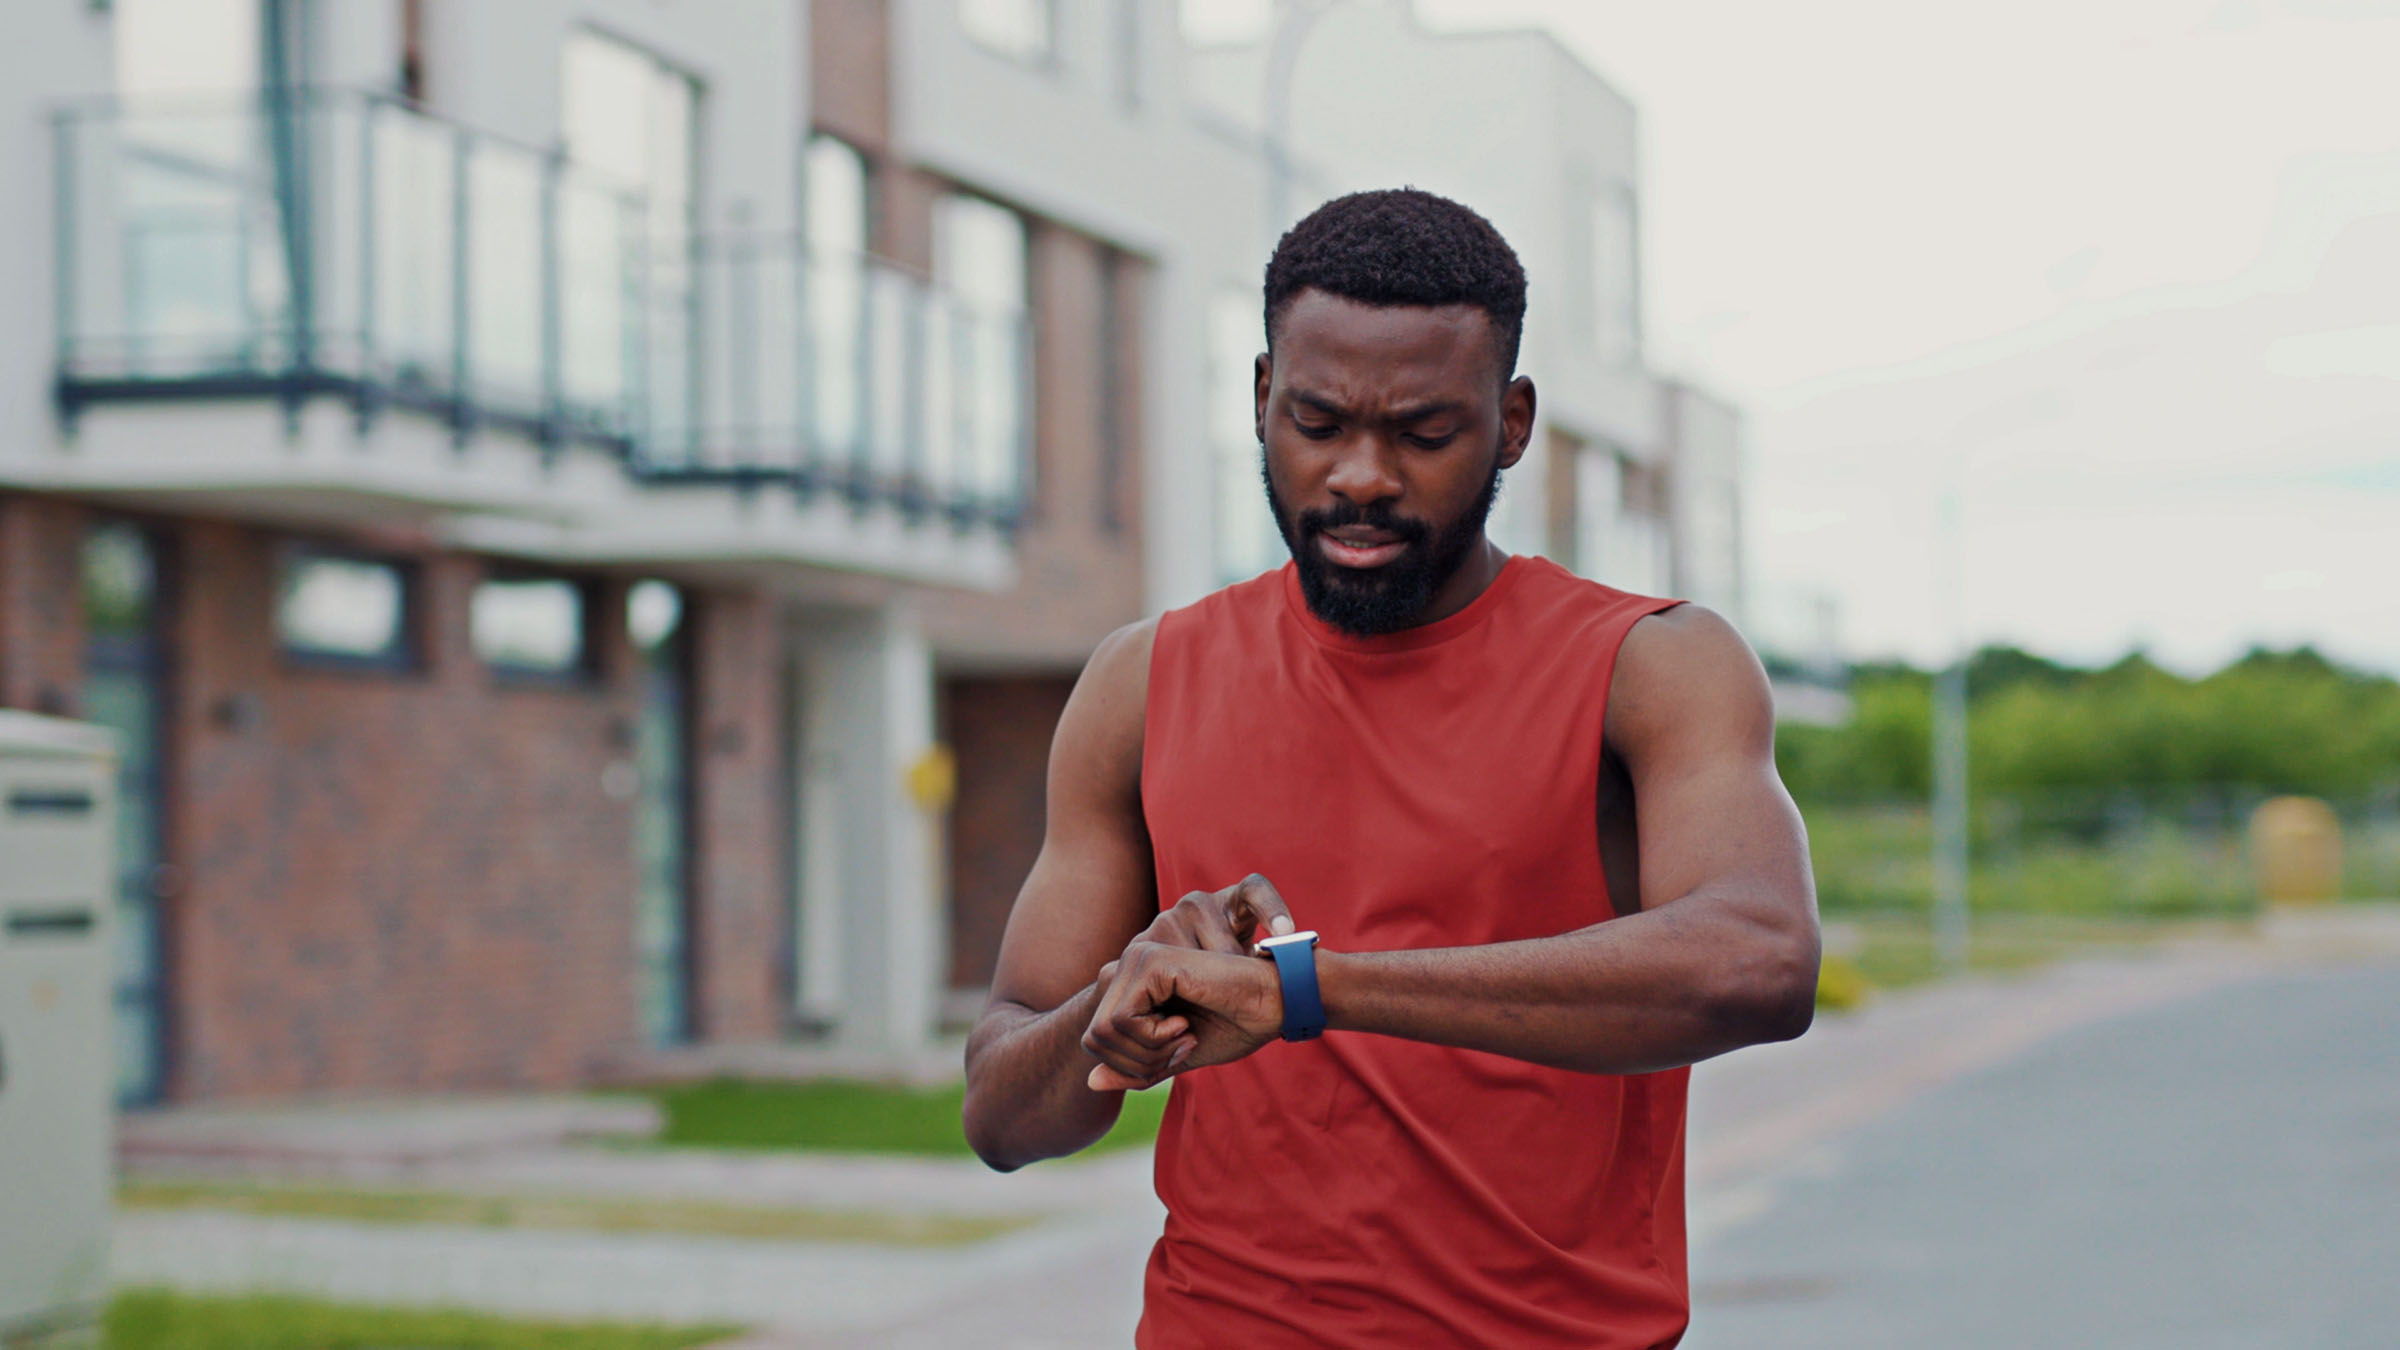 Man running in the street looking on heart rate monitor on smartwatch. Portrait of motivated athlete using fitness tracker training outdoors.